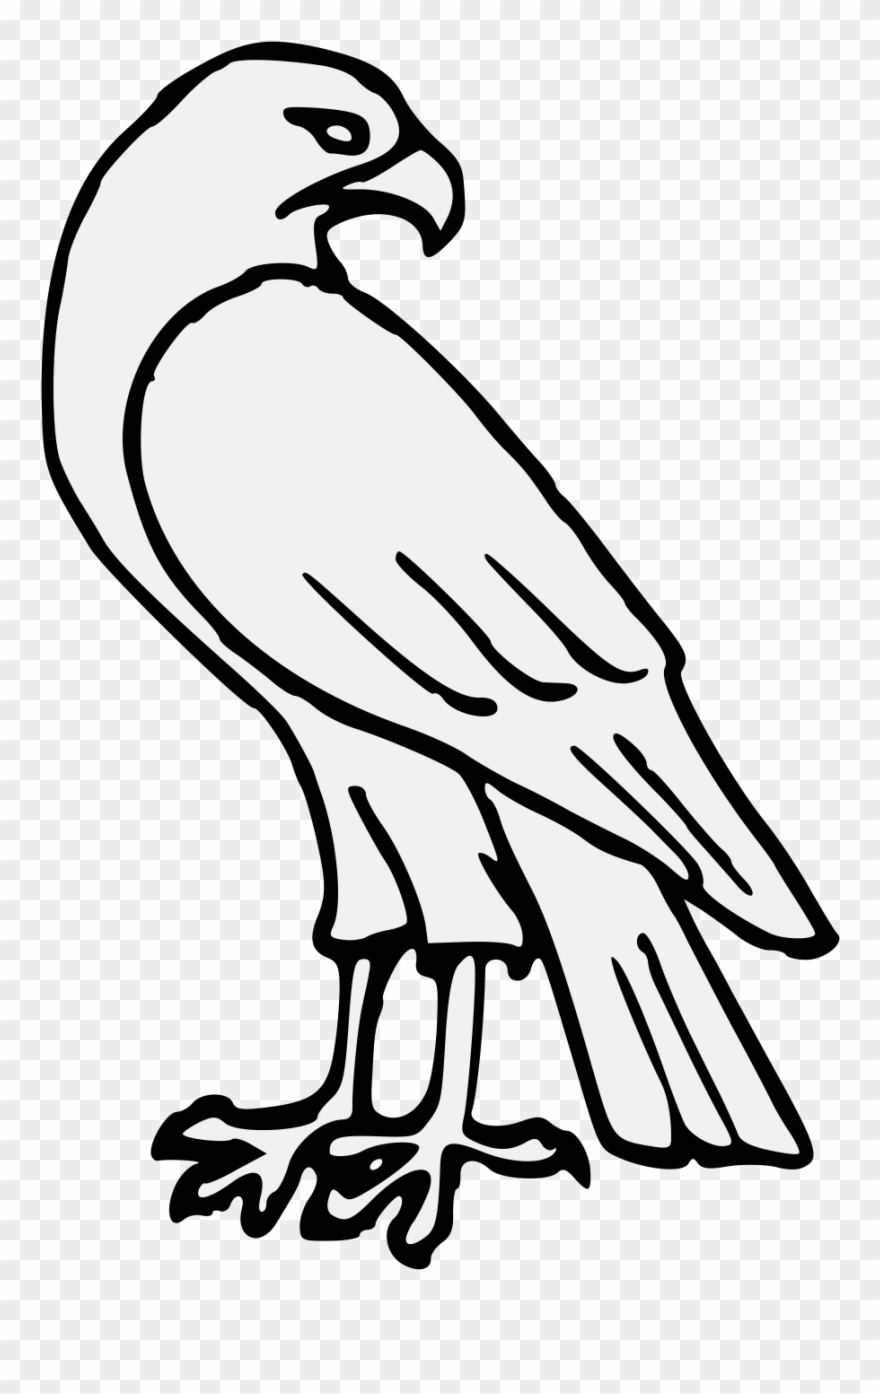 Falcon clipart simple. Pdf easy drawing pinclipart